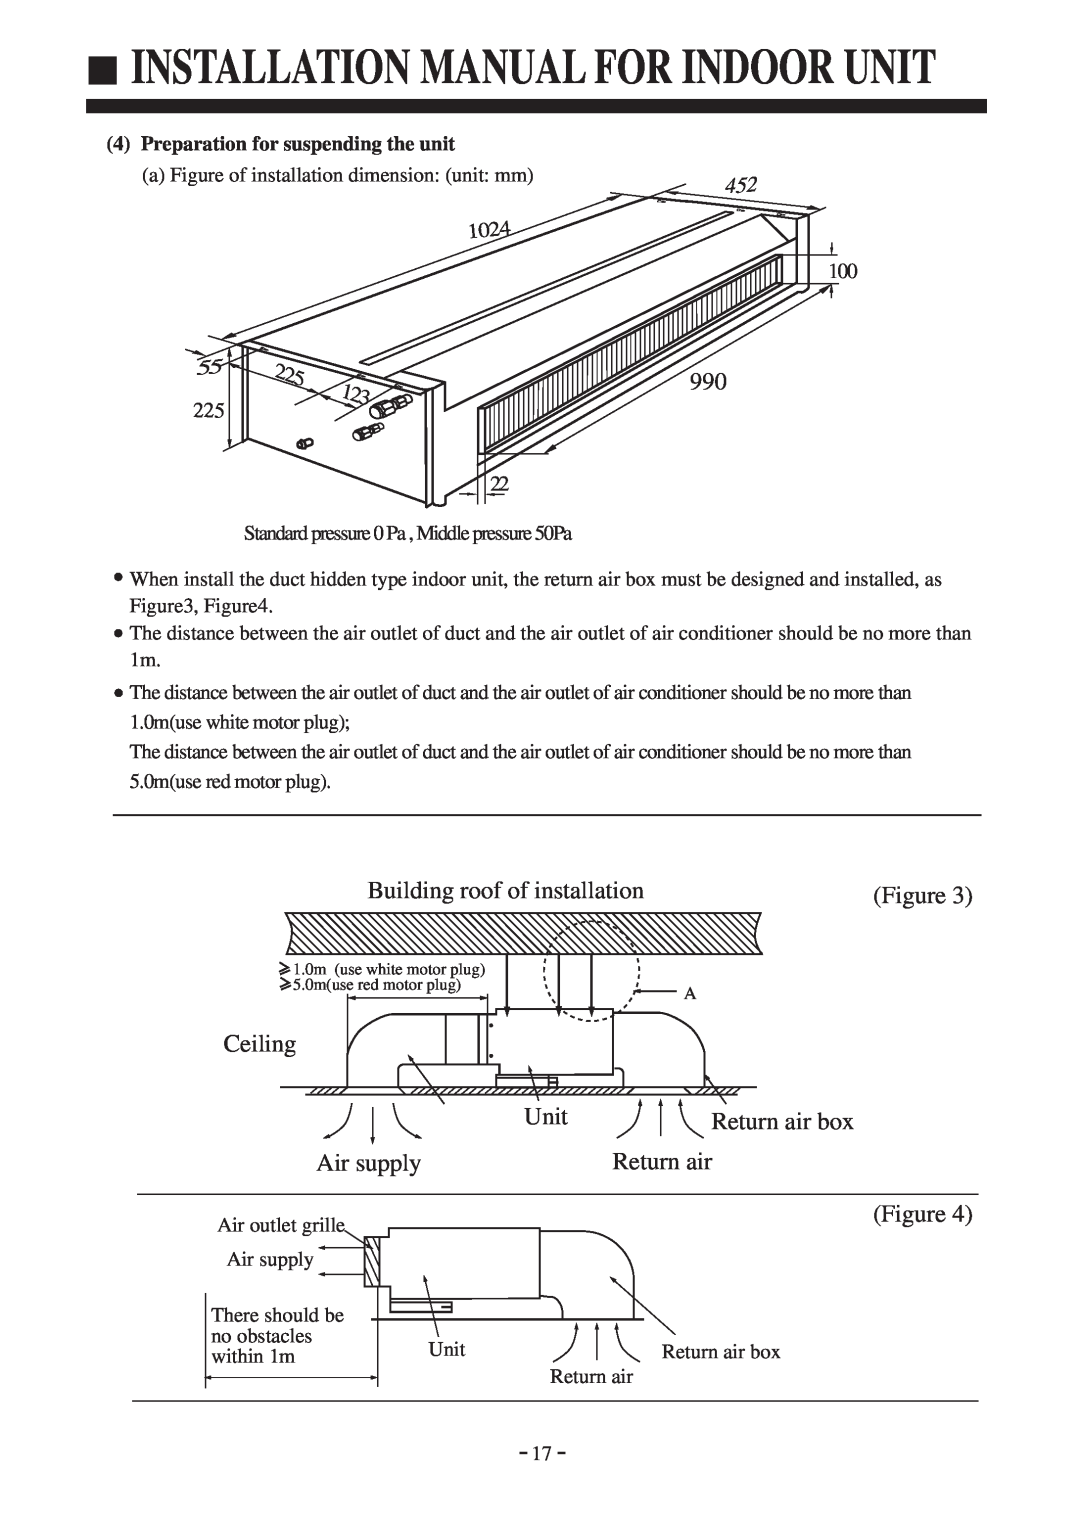 Haier AD142AMBIA Installation Manual For Indoor Unit, Building roof of installation, Ceiling, Return air box, Air supply 